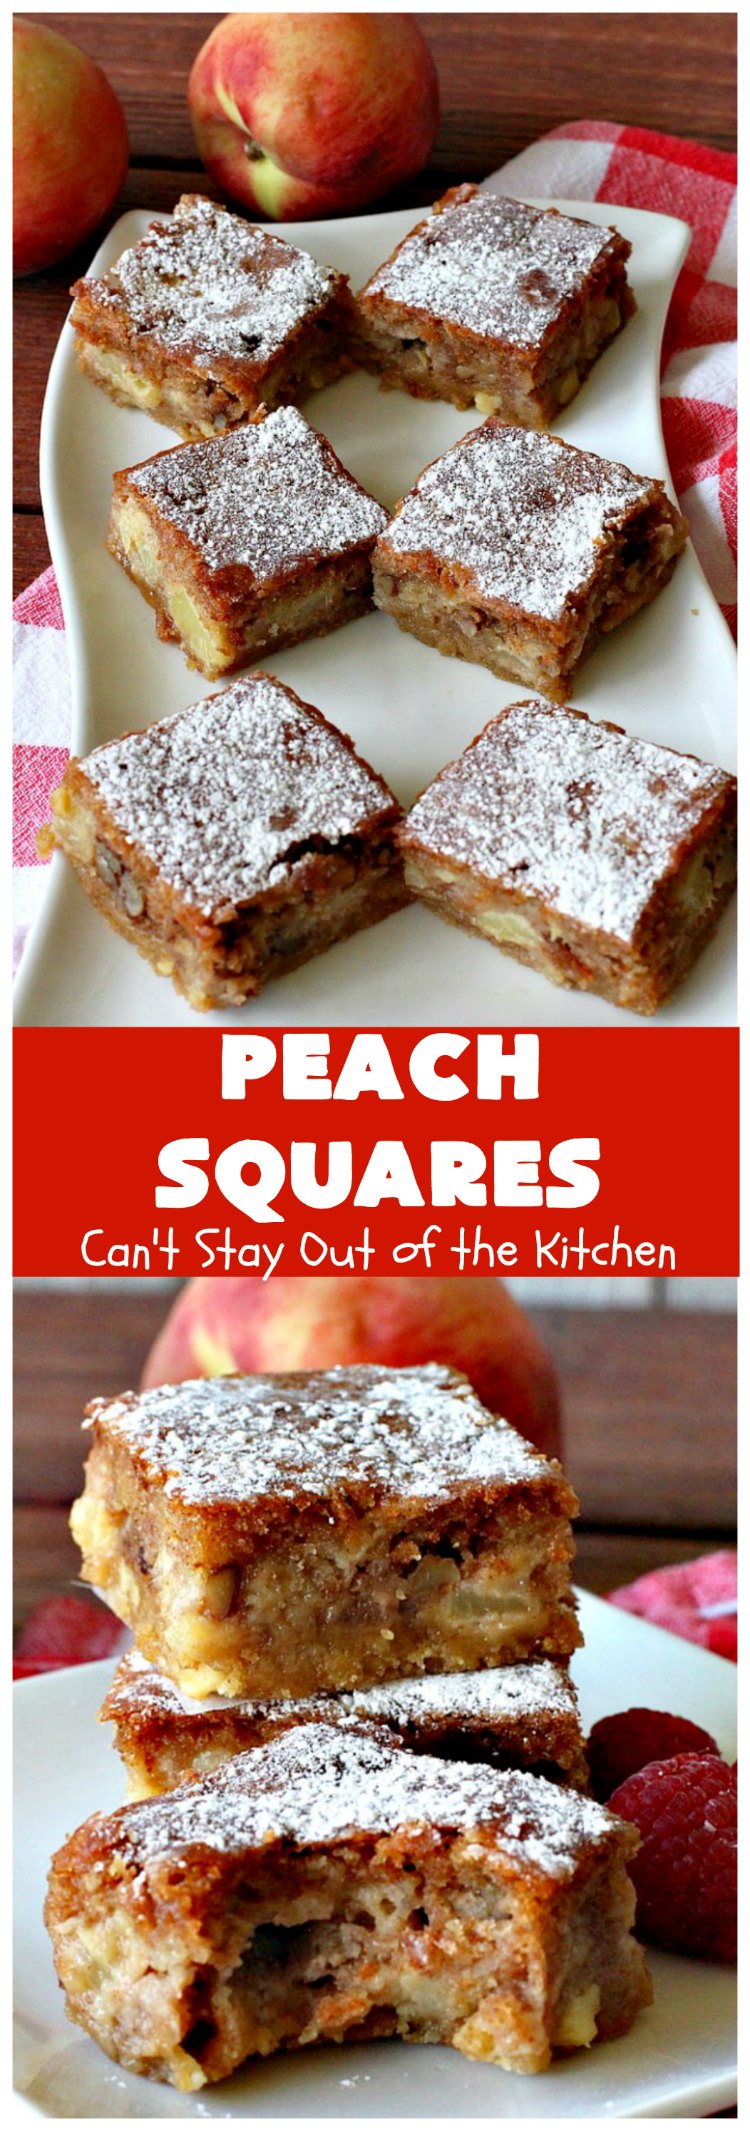 Peach Squares | Can't Stay Out of the Kitchen | this awesome #recipe can't be beat! If you enjoy #peaches, you'll love them in this amazing #dessert. #cookies #PeachDessert #PeachSquares #walnuts